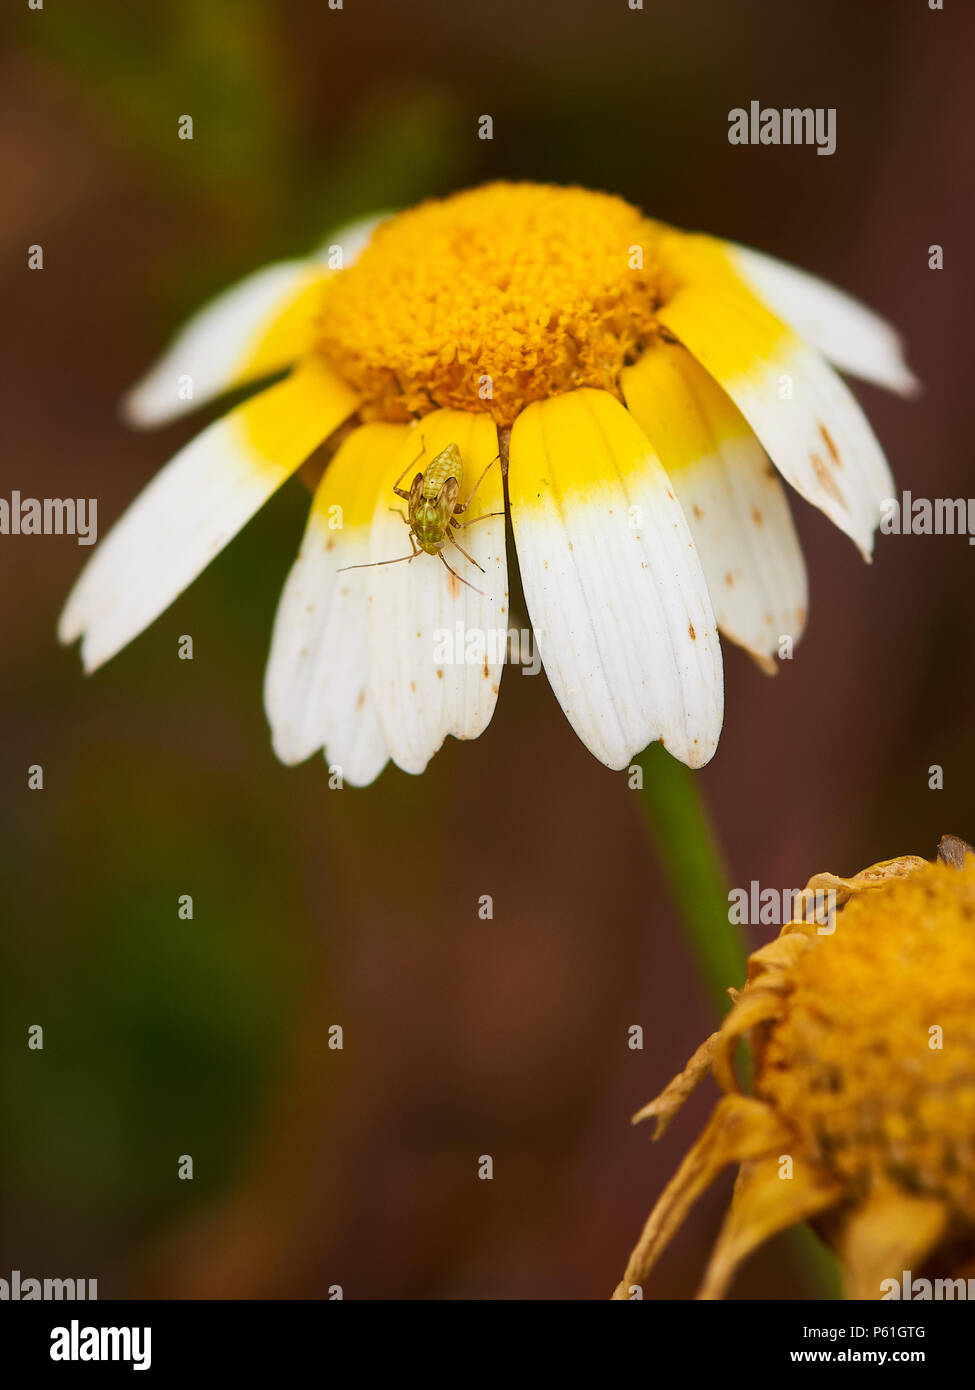 Macro detail of an insect of order Hemiptera over a daisy flower (Glebionis coronaria) in Ses Salines Natural Park (Formentera,Balearic Islands,Spain) Stock Photo